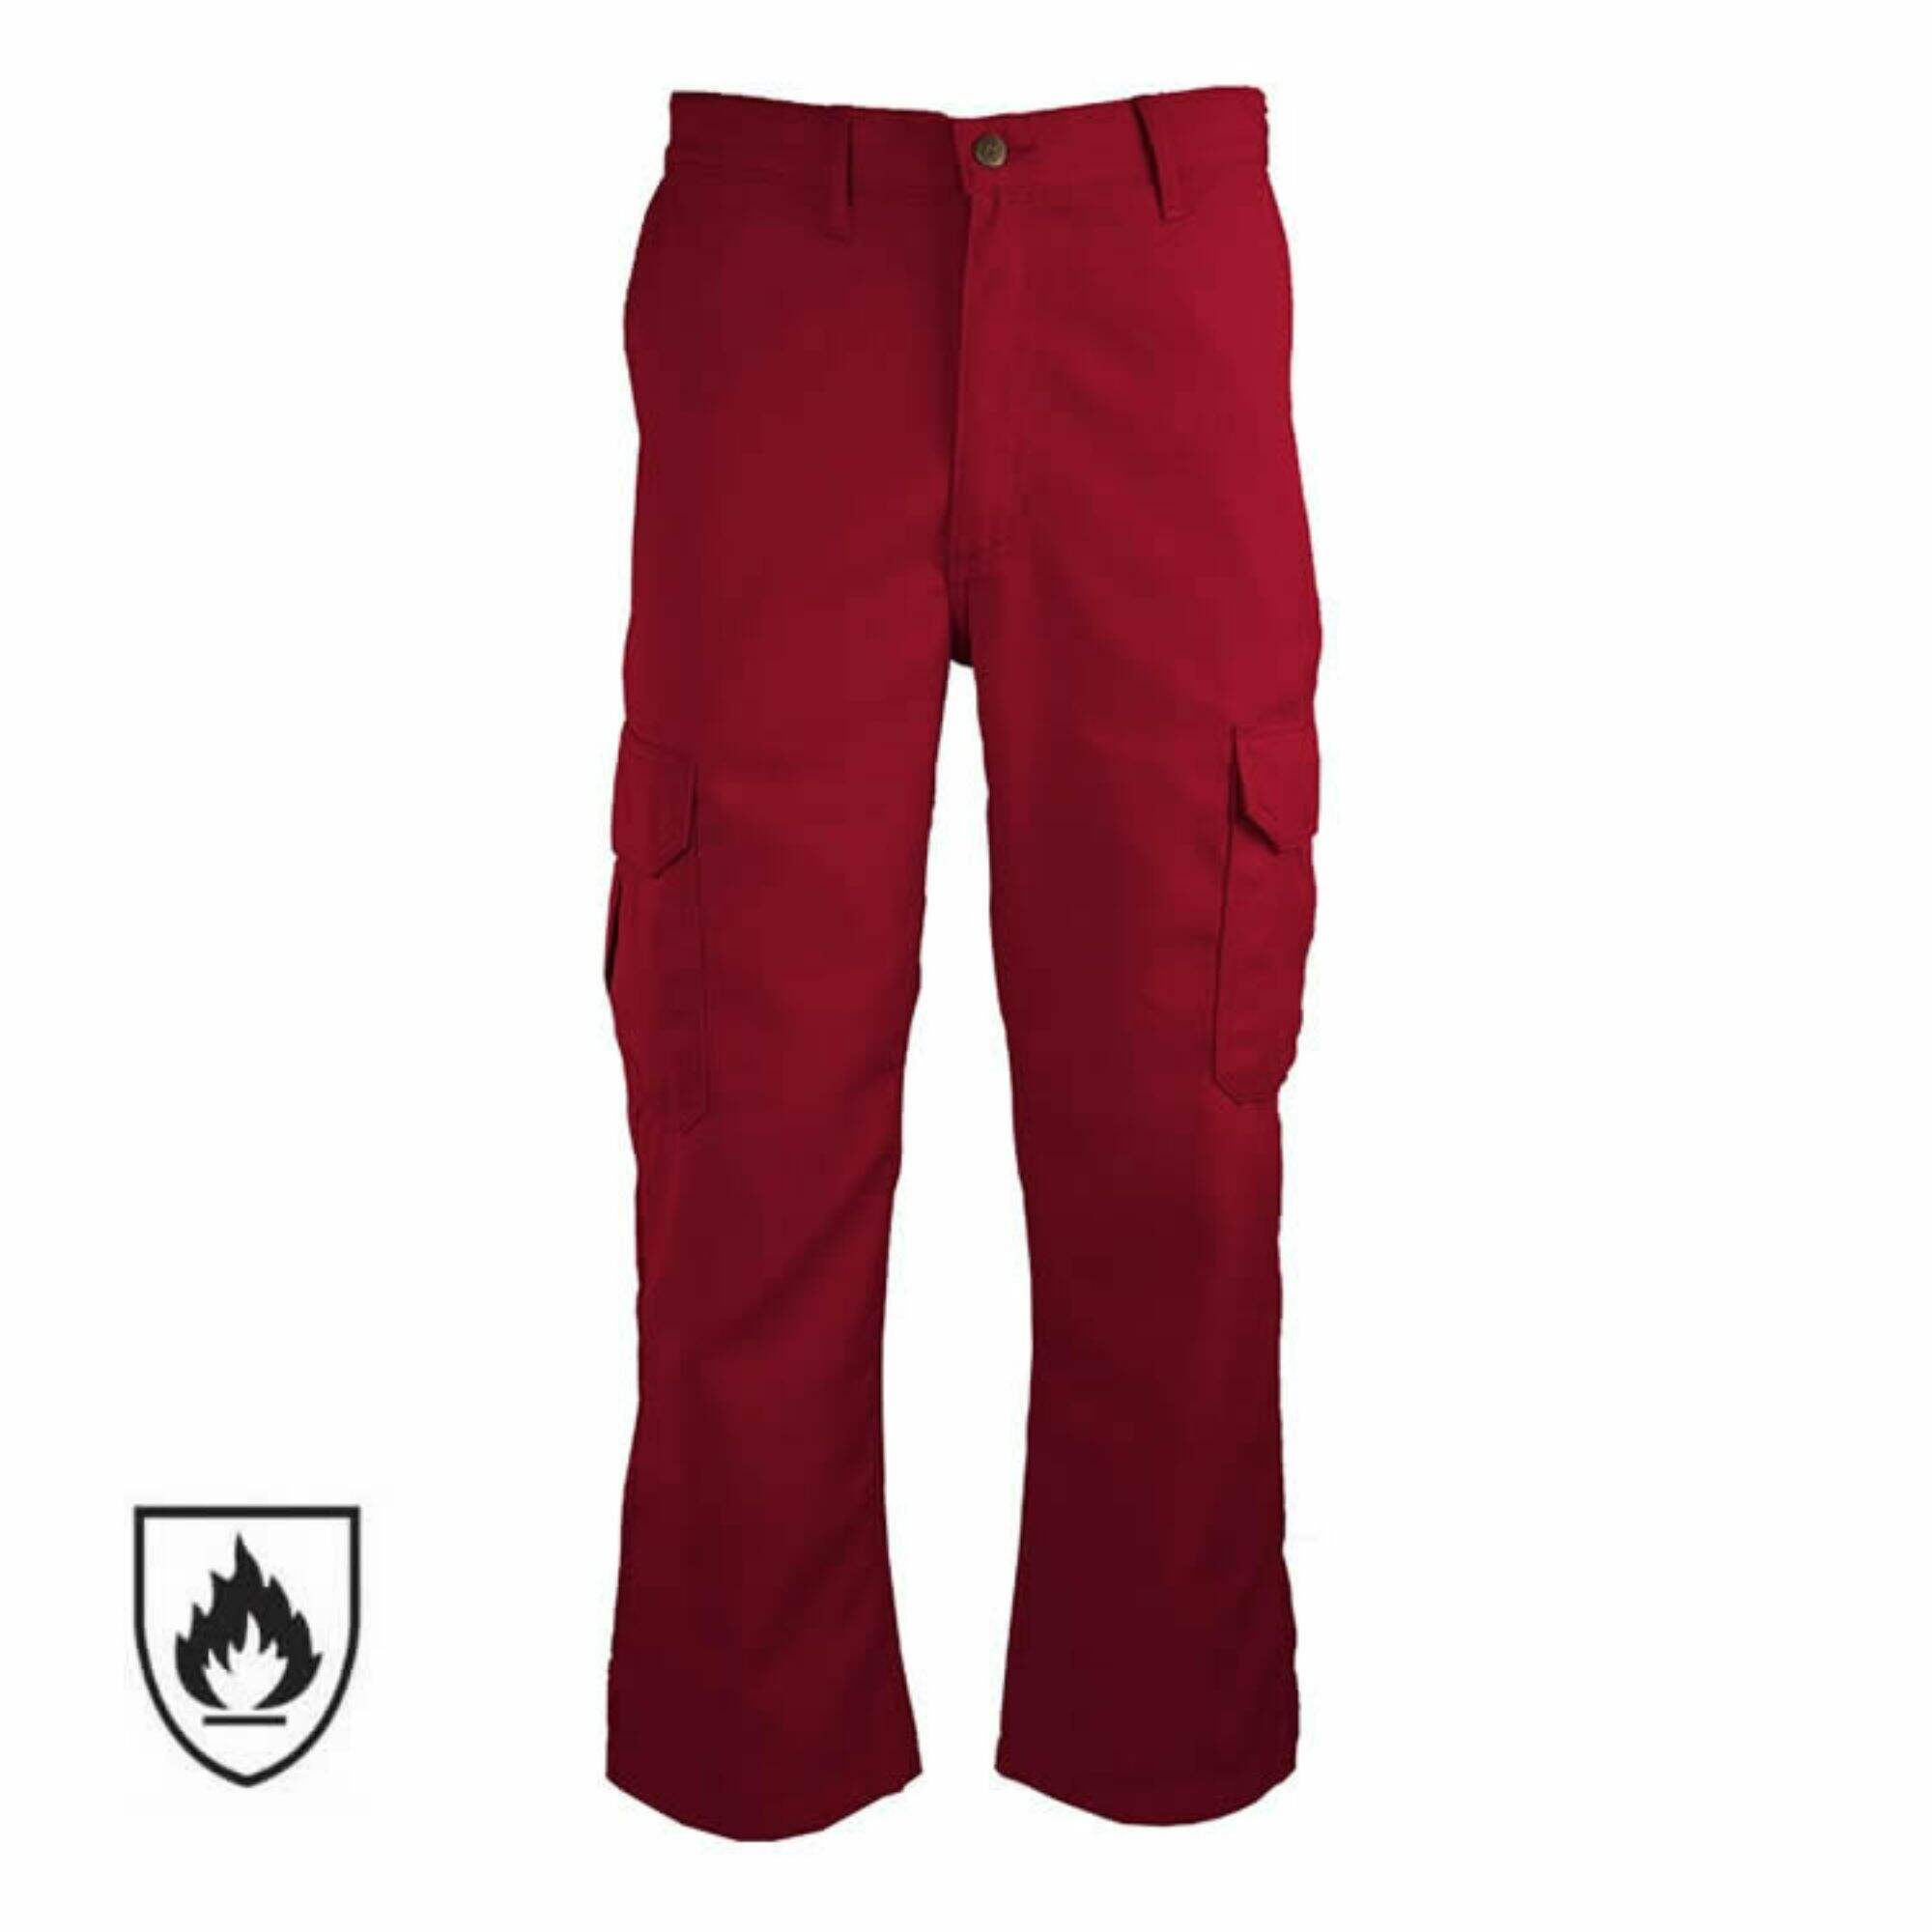 Wholesale Cotton Industrial Welding Cargo Fire Proof Flame Resistant Trousers